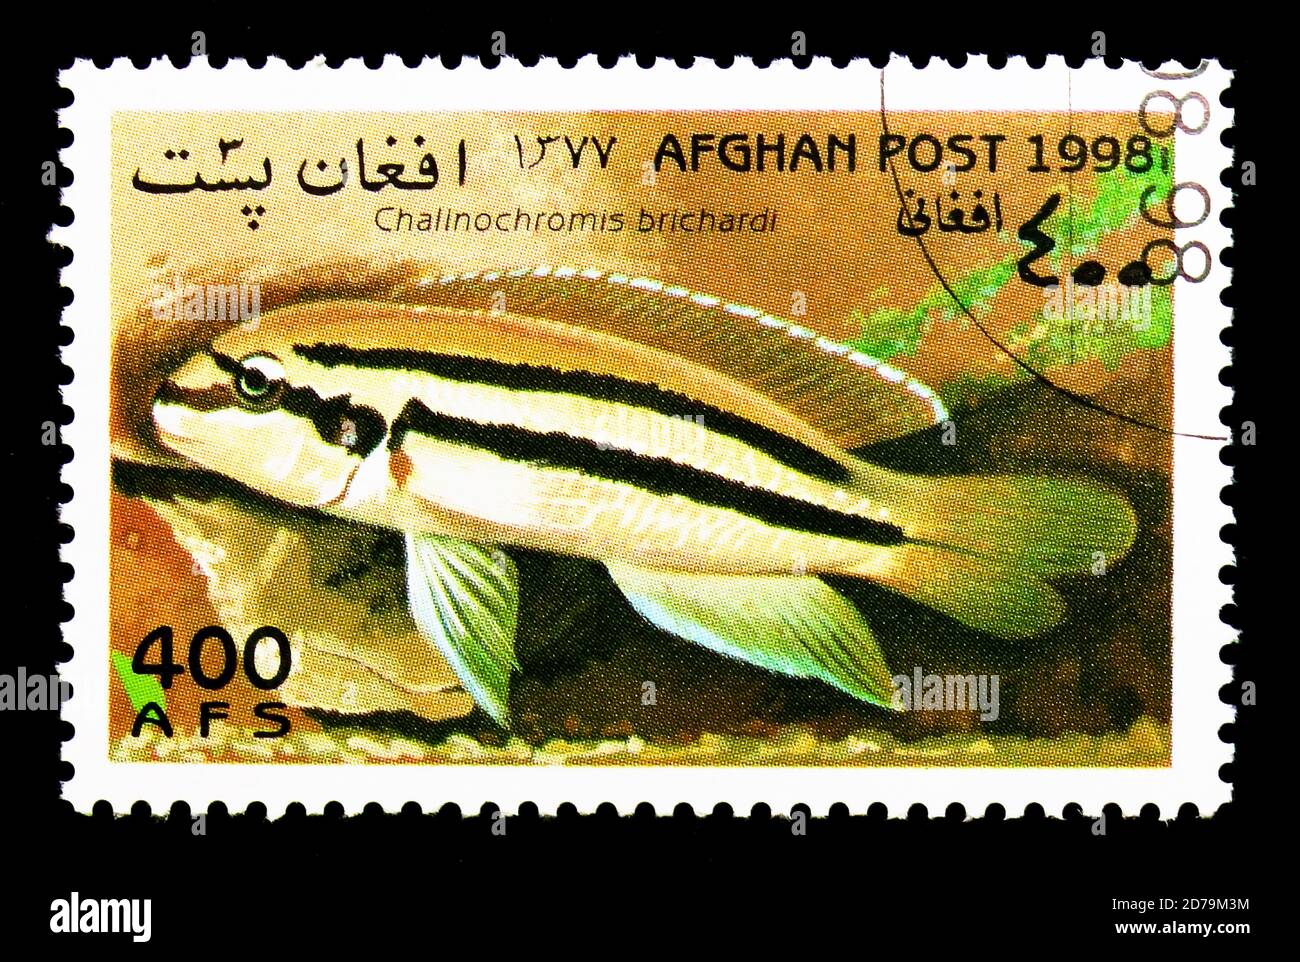 MOSCOW, RUSSIA - DECEMBER 21, 2017: A stamp printed in Afghanistan shows Reins Cichlid (Chalinochromis brichardi), Fish serie, circa 1998 Stock Photo